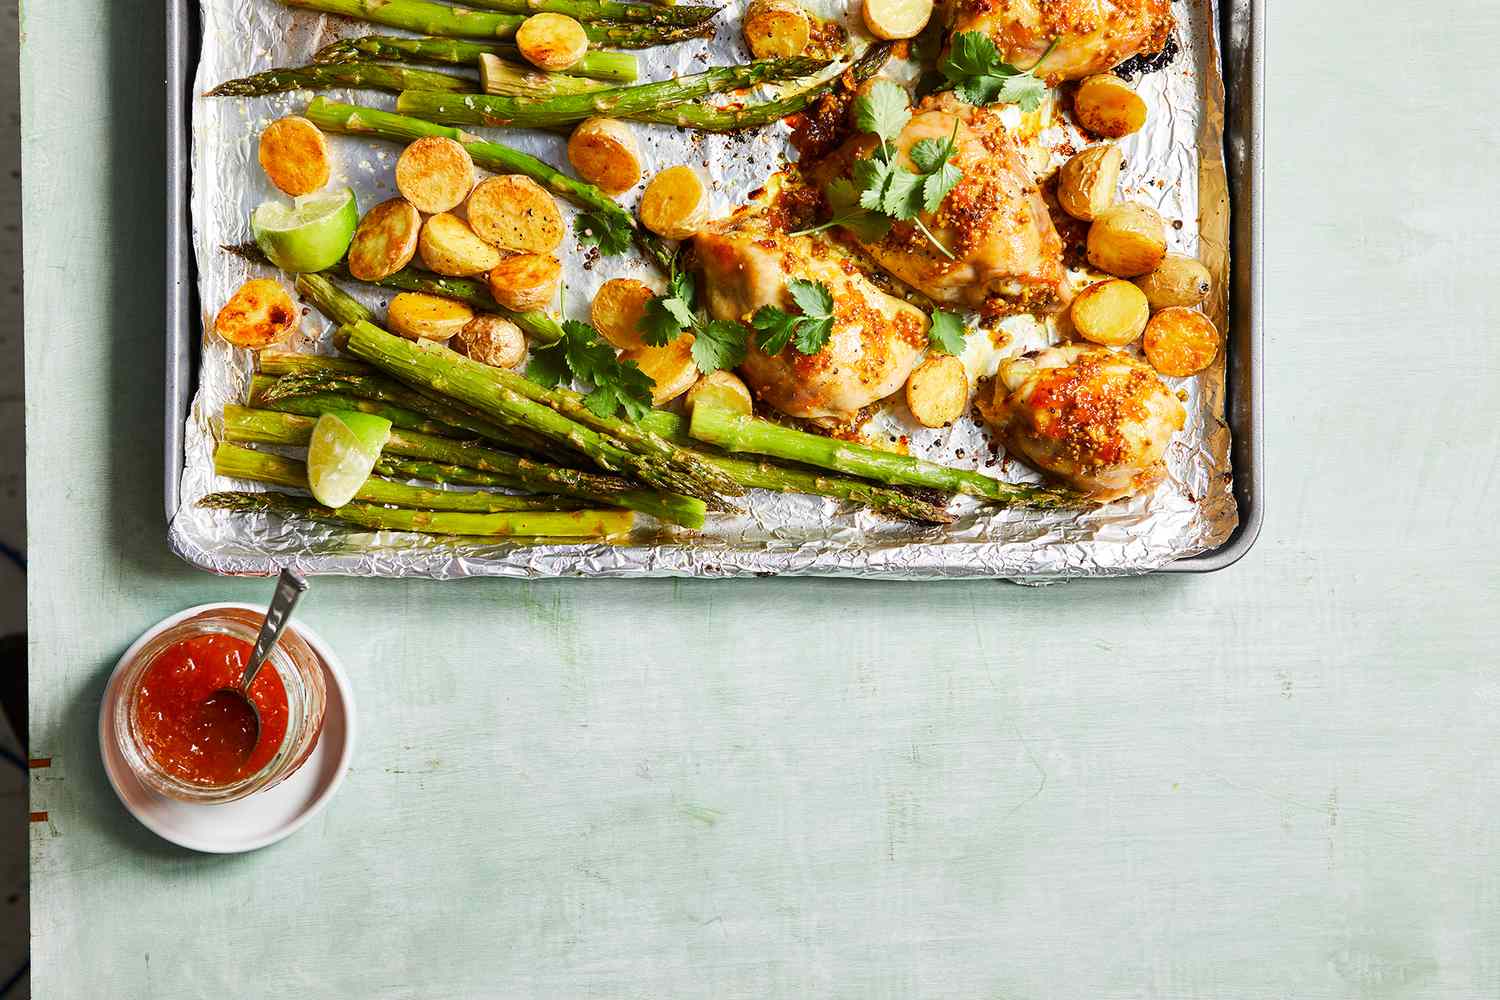 Apricot Glazed Chicken with Potatoes & Asparagus